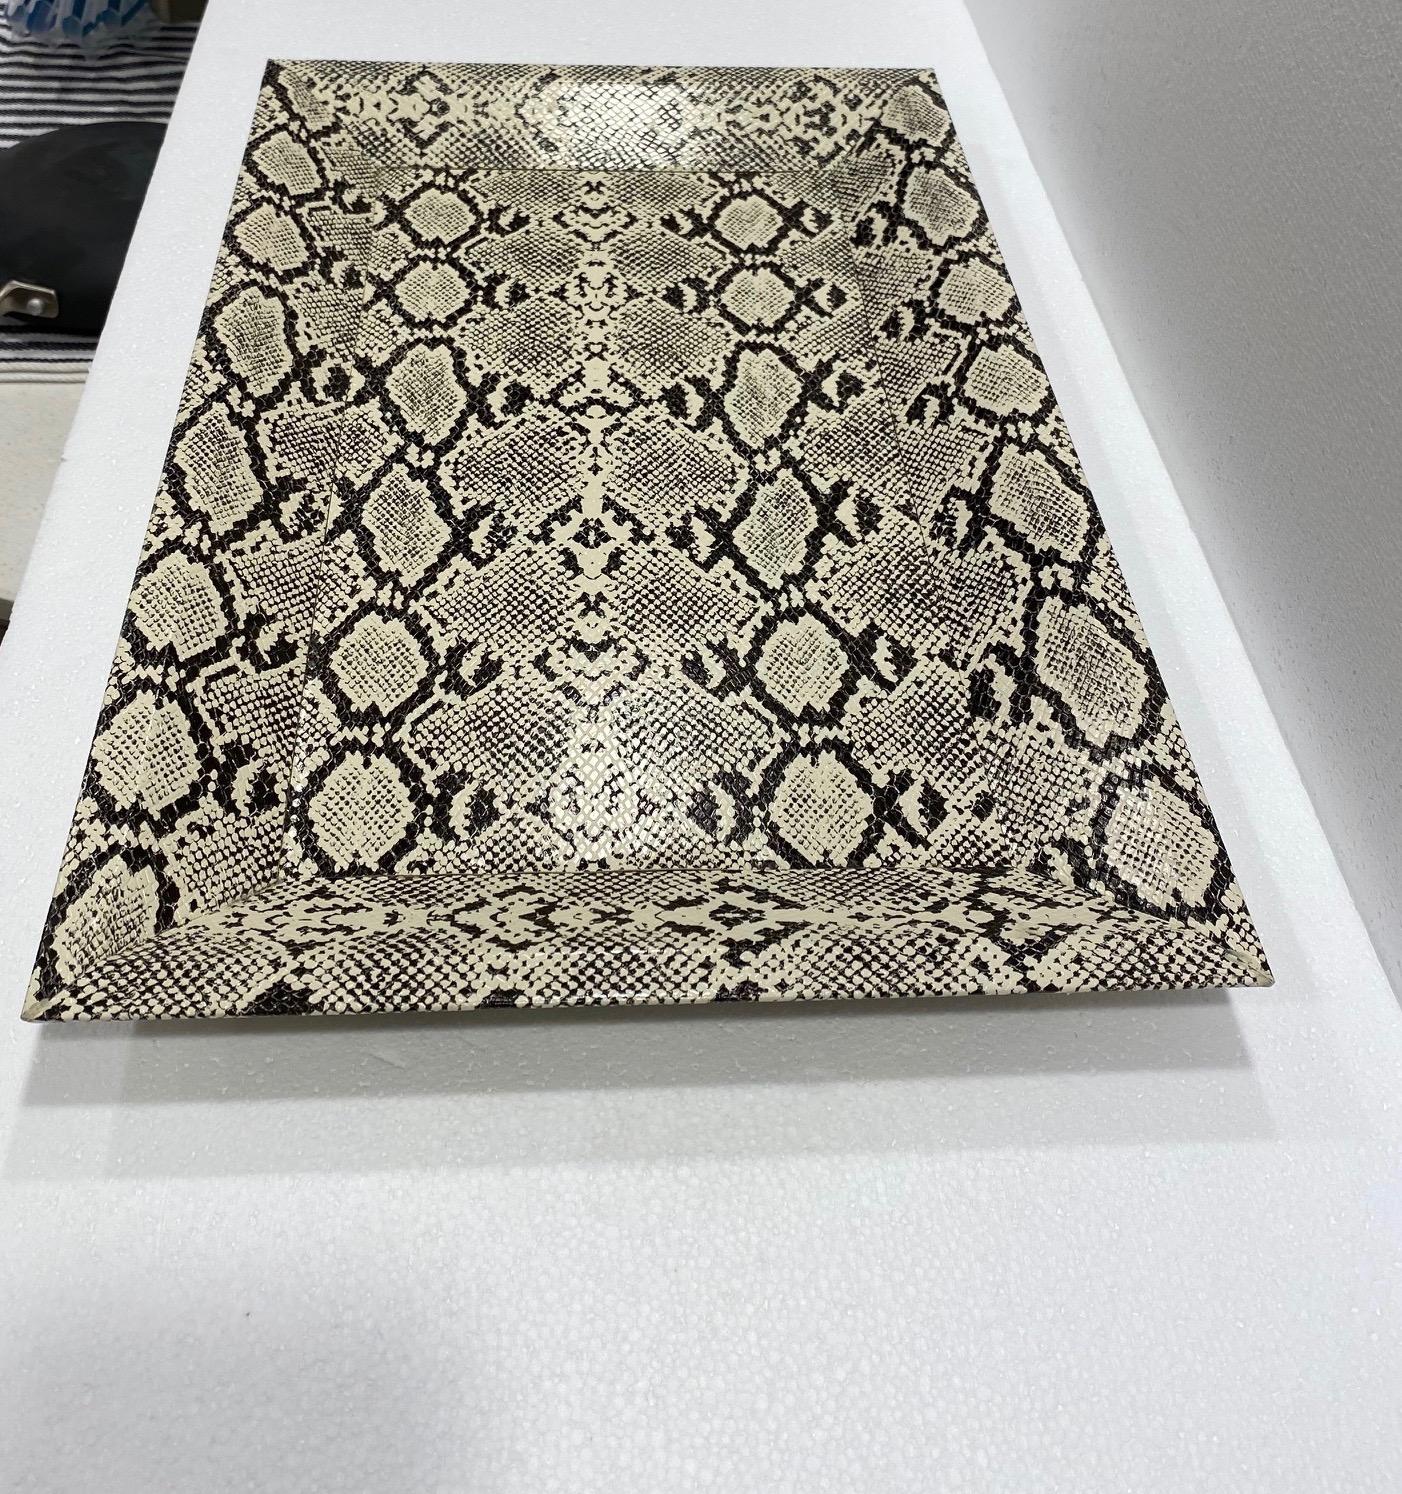 Hand-Crafted Vintage Organic Modern Faux Python Leather Tray in Ivory and Black, circa 2010